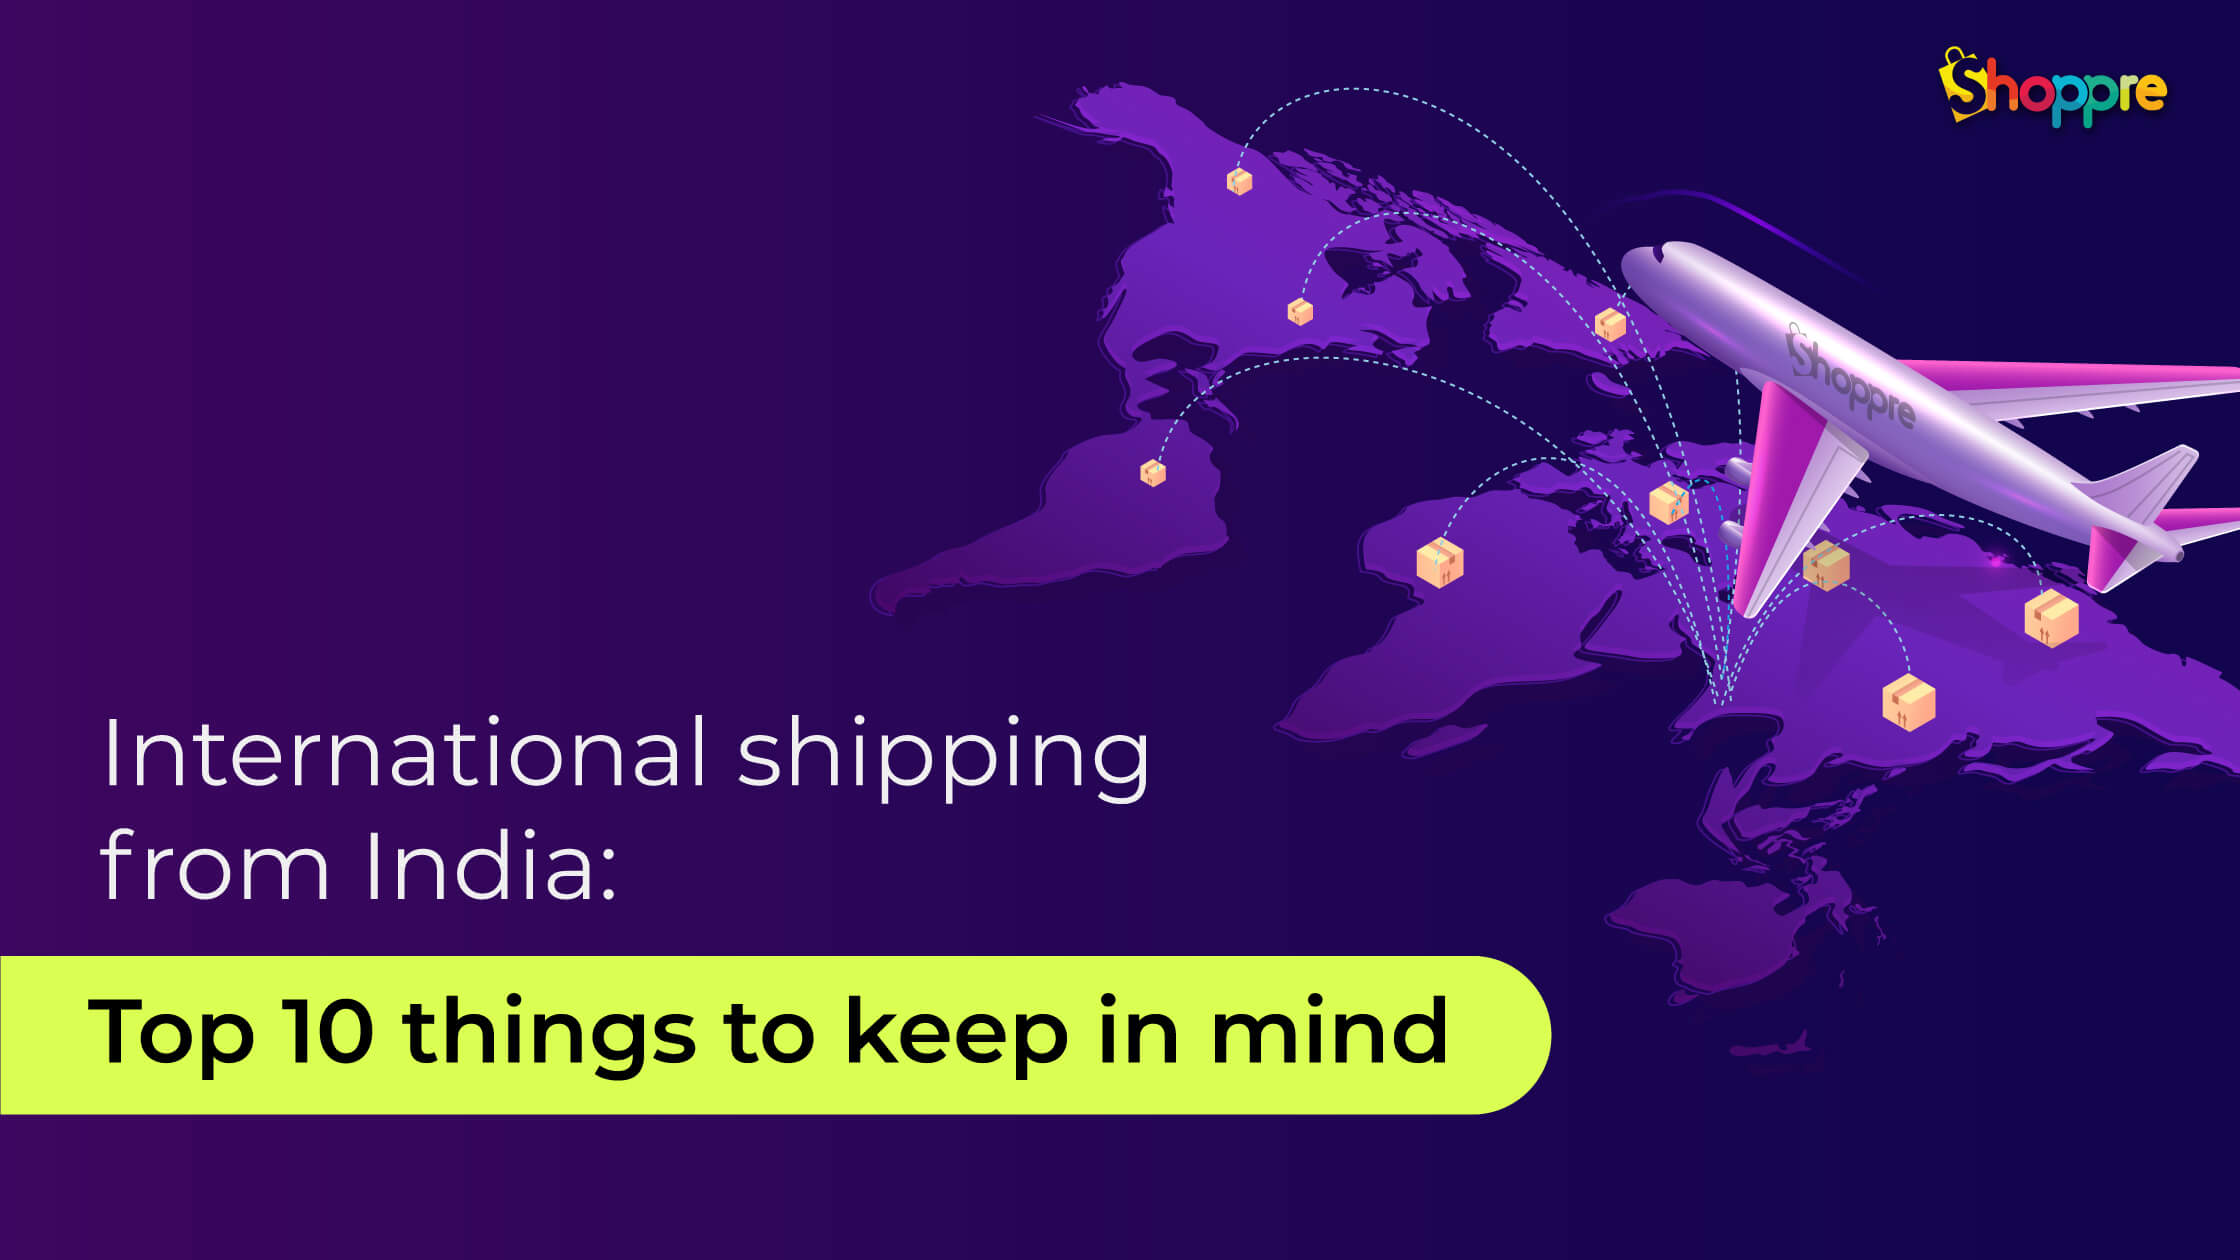 Guide to International Shipping